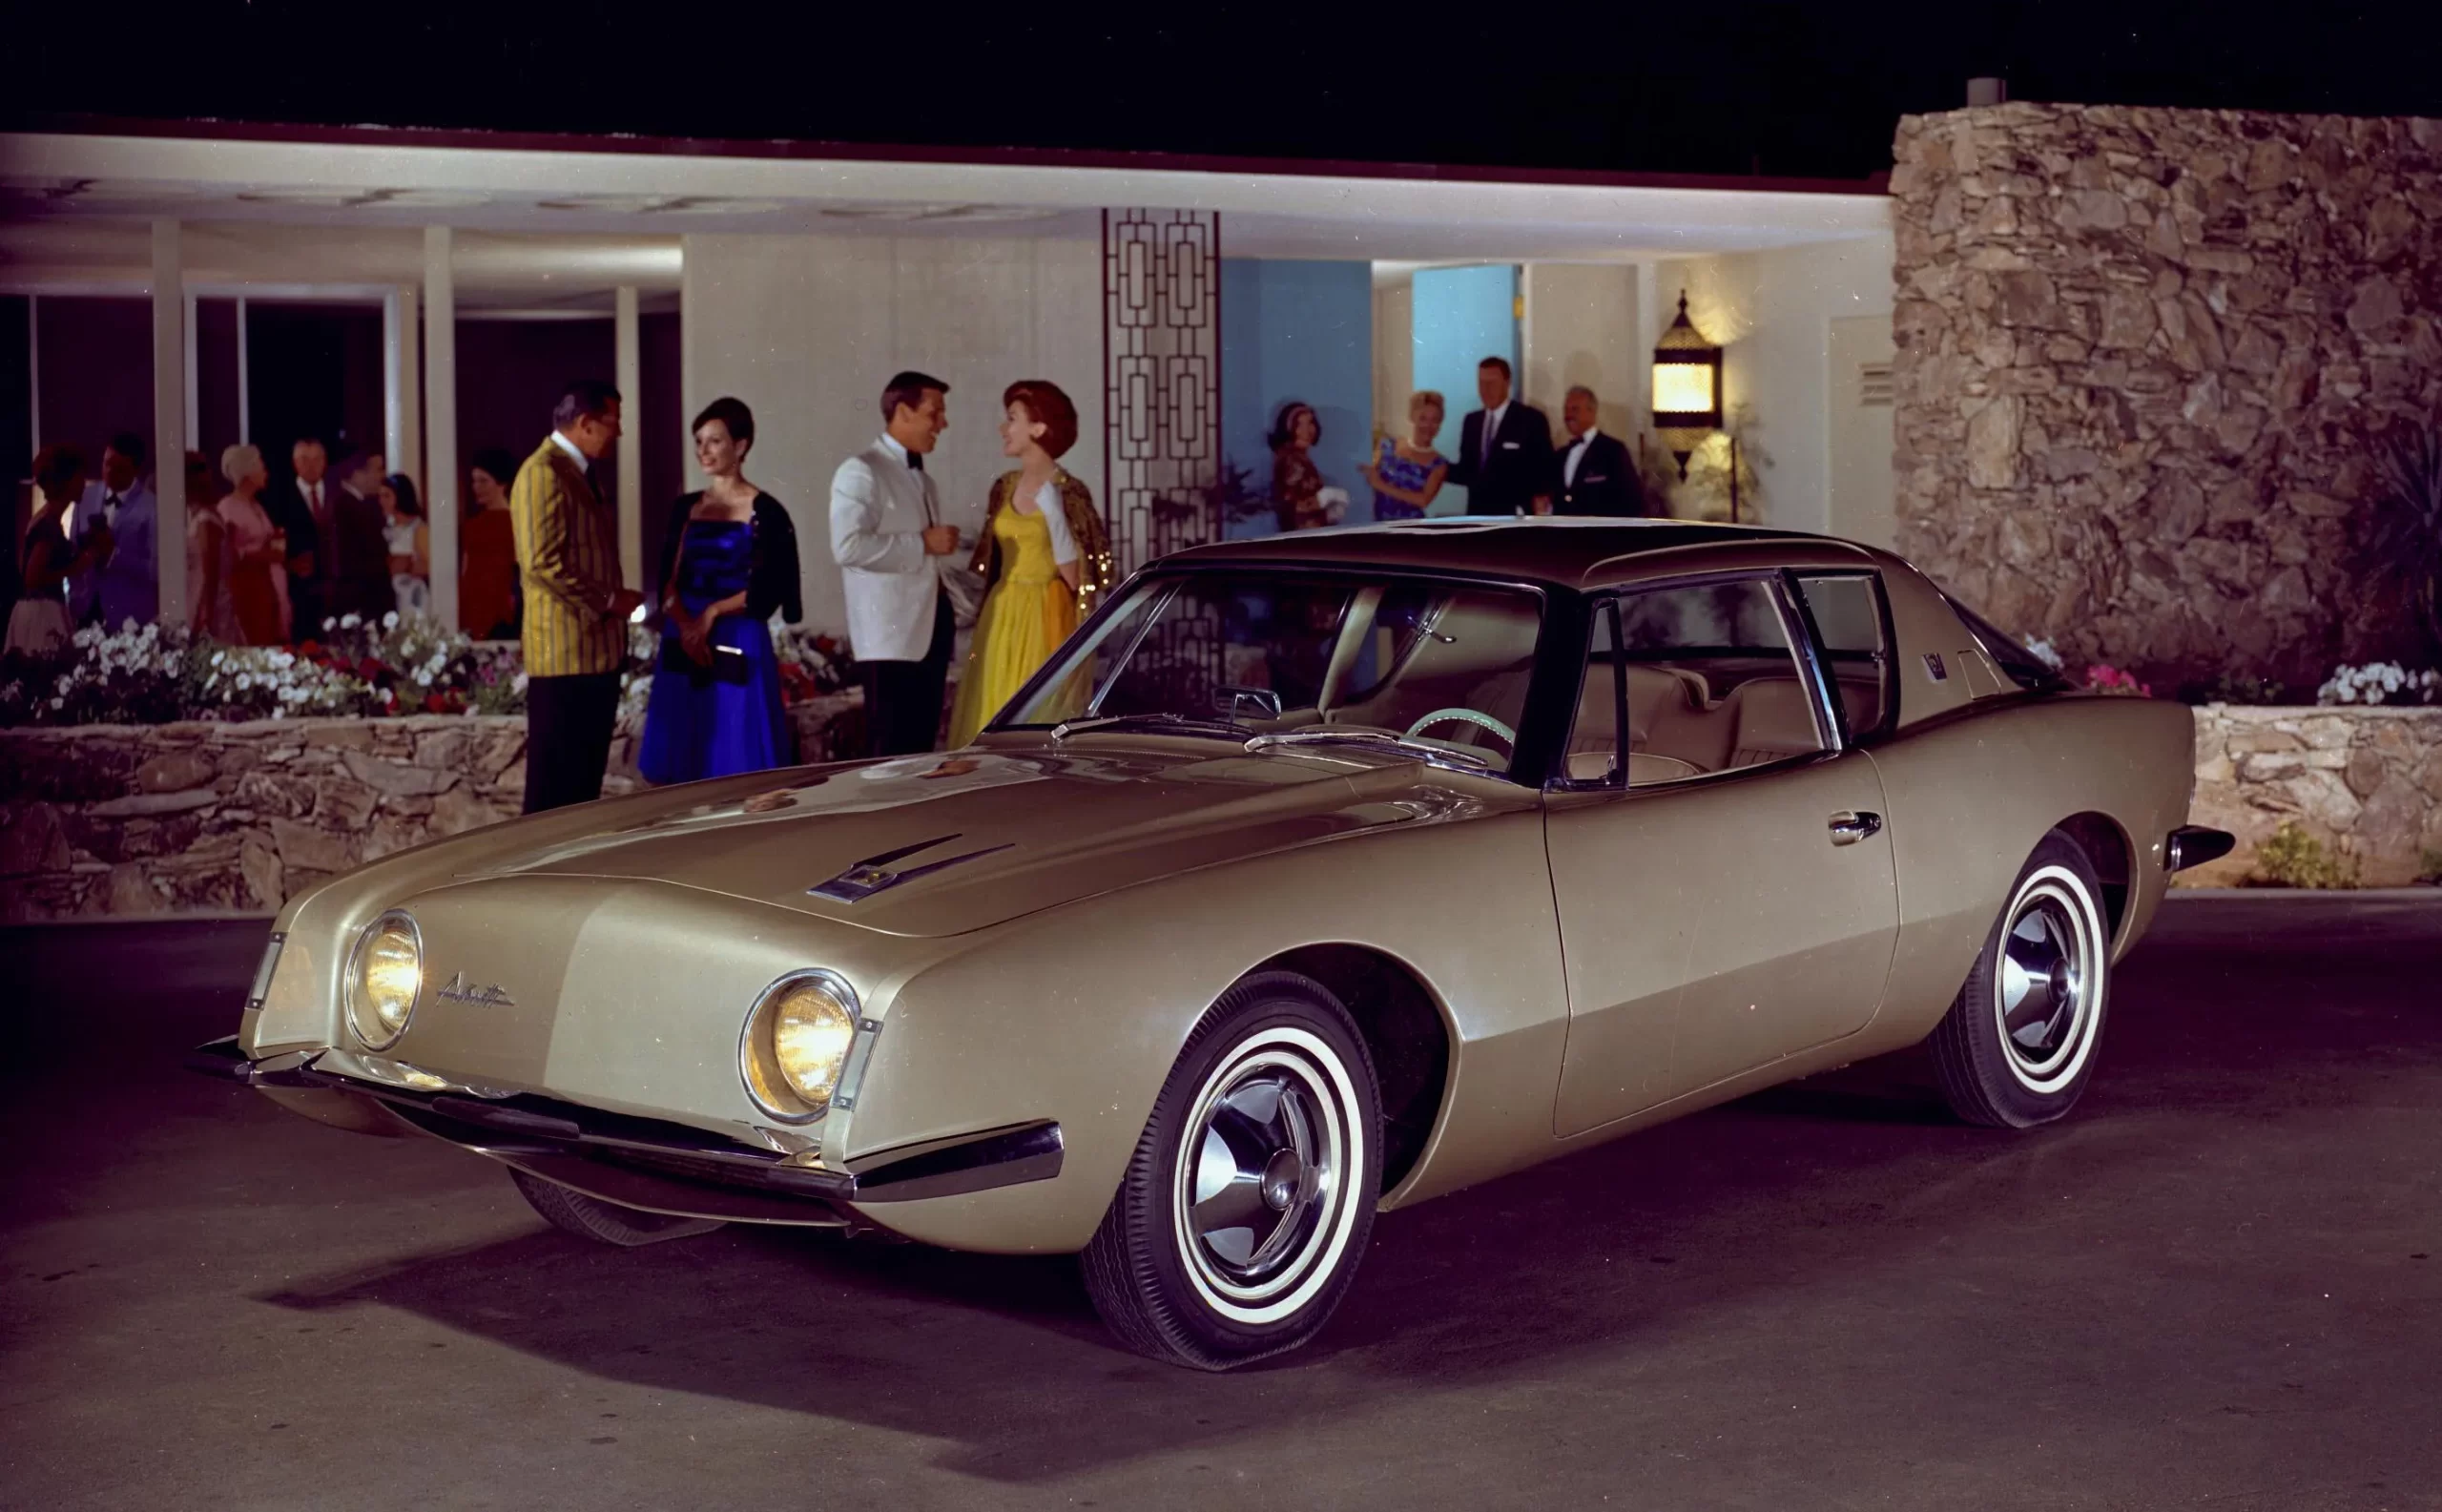 Studebaker Cars and the History of the Automotive Industry